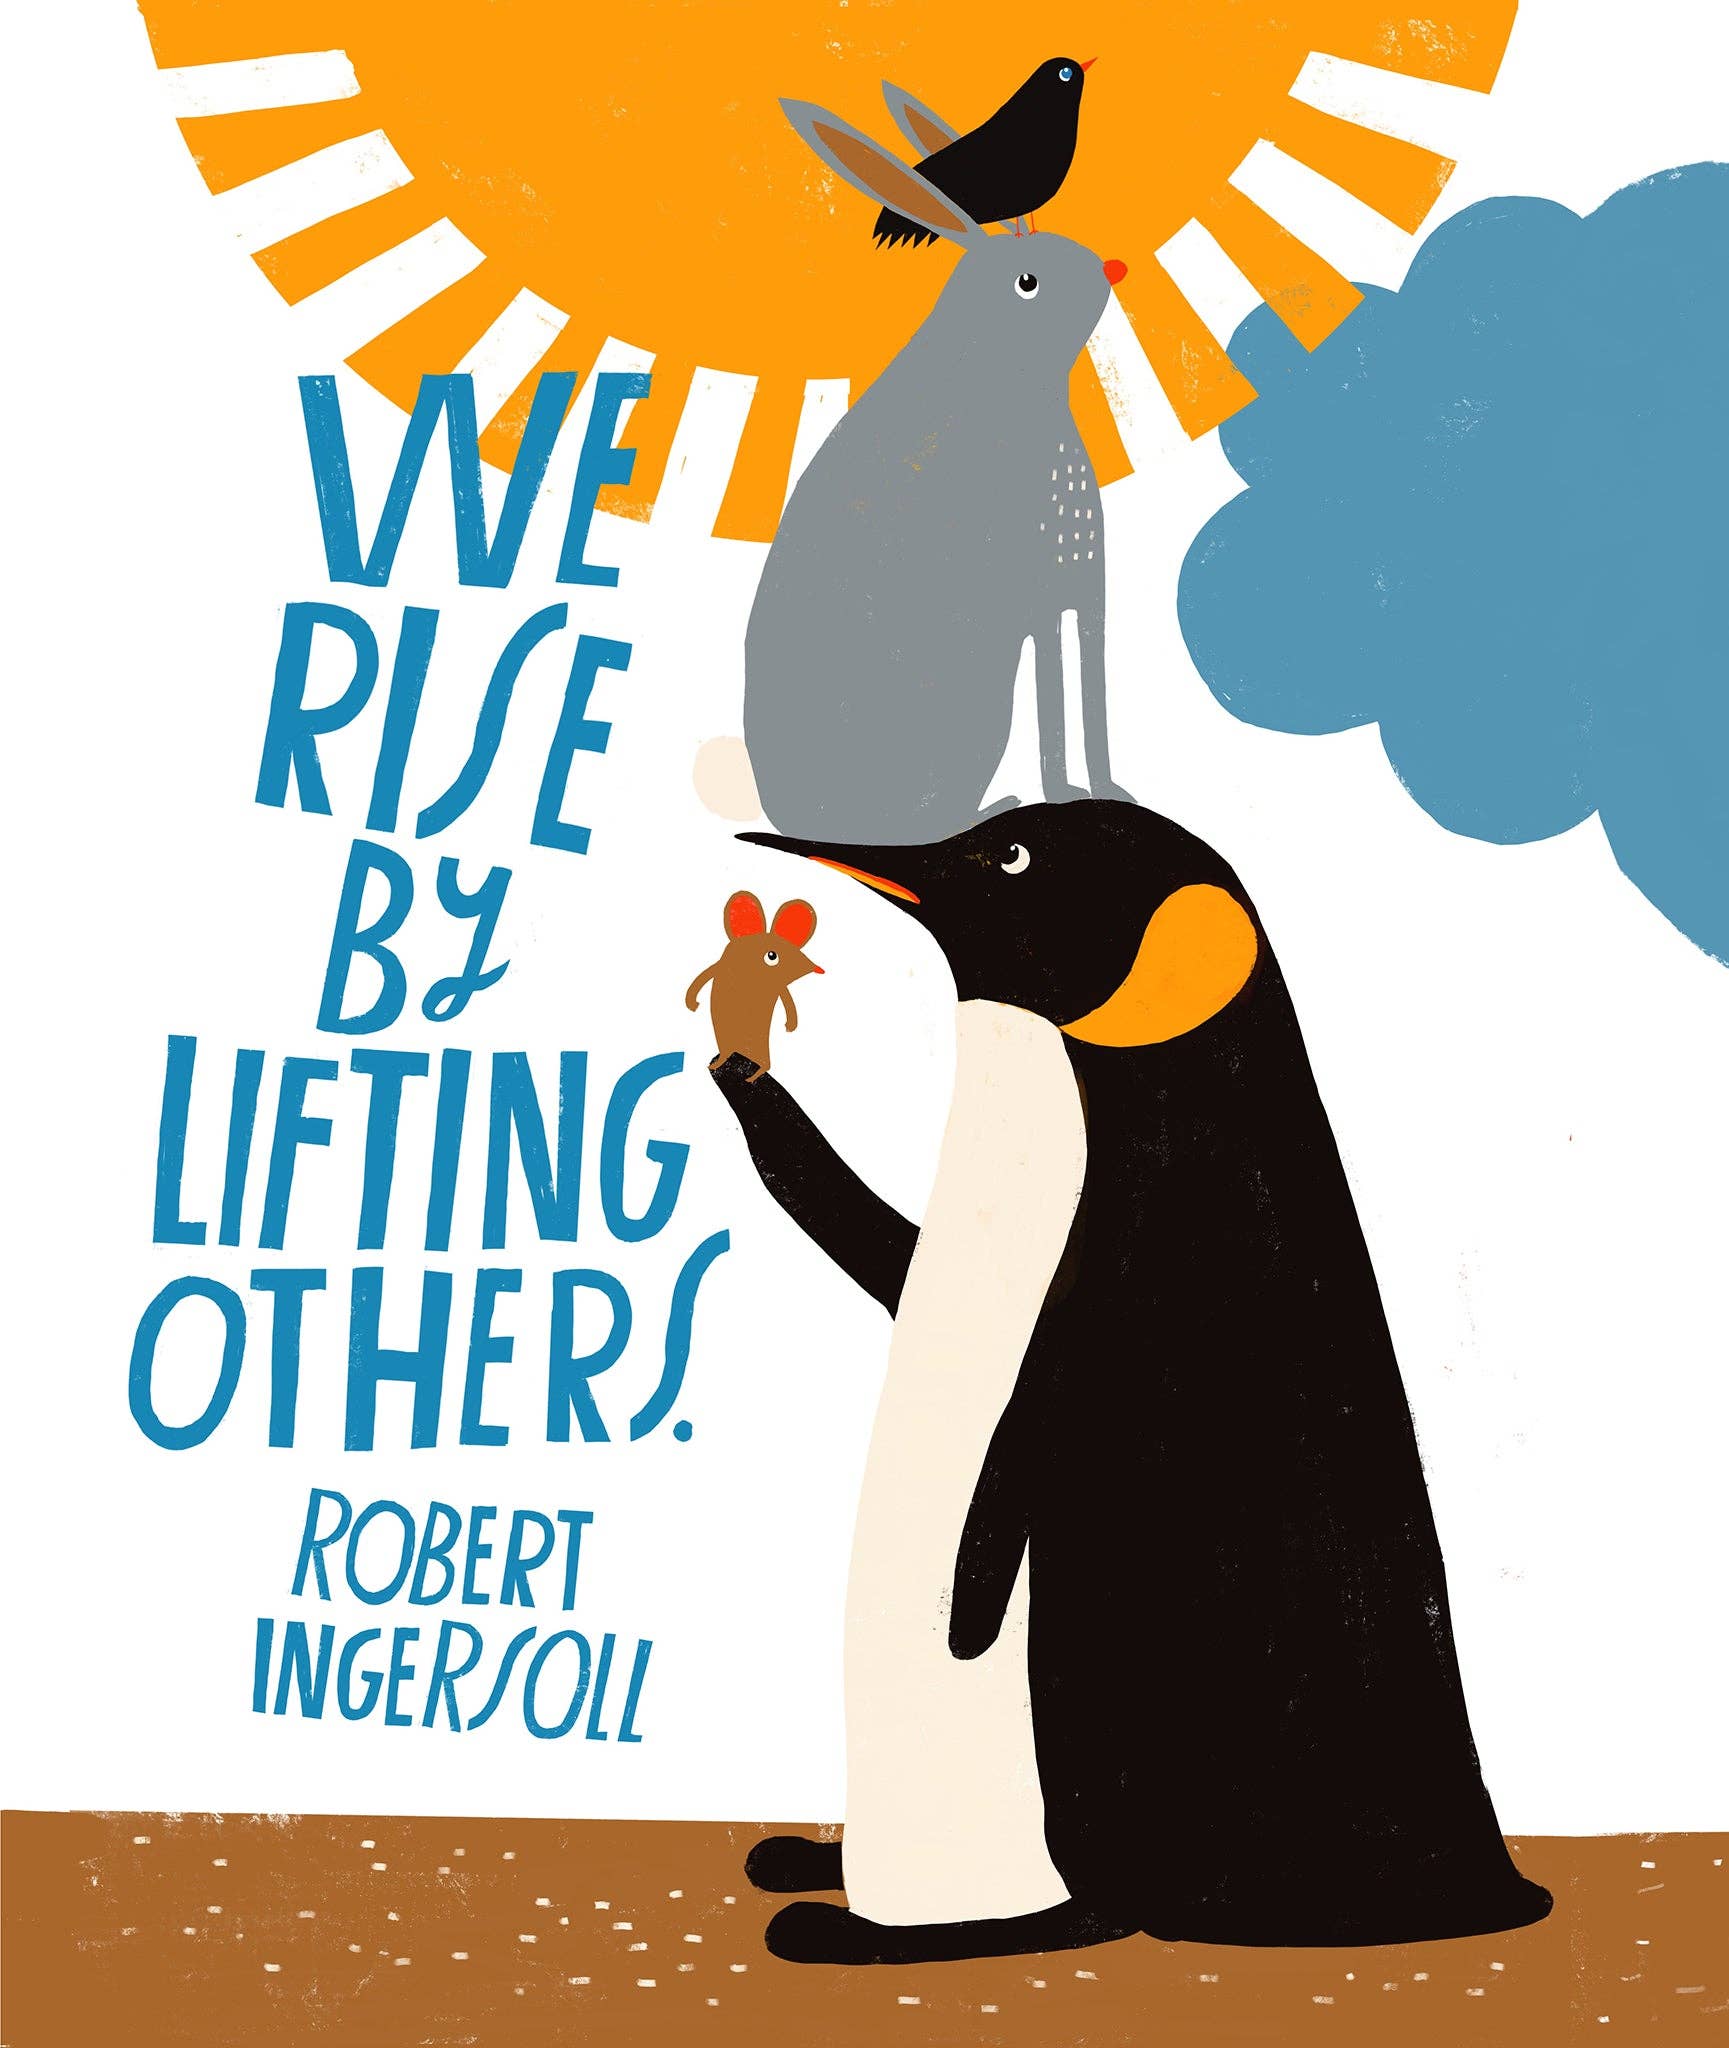 We Rise By Lifting Others by Lisa Congdon